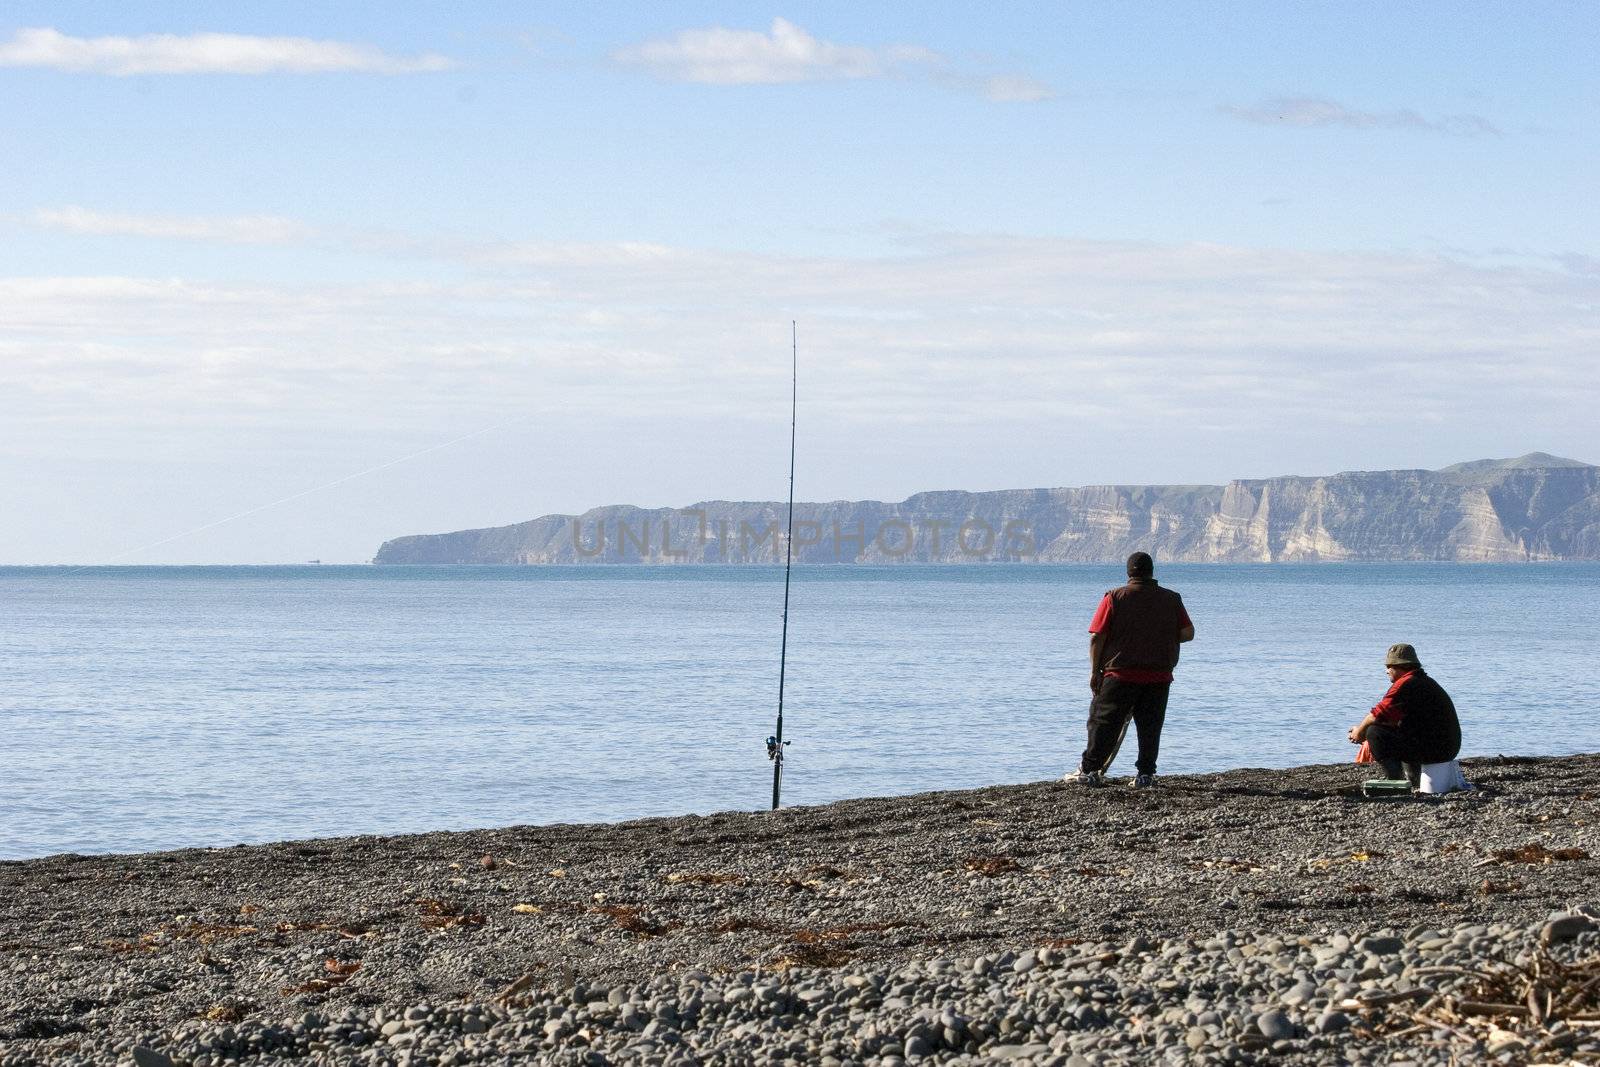 A couple of blokes sitting in the sun on an autumn day pretending to fish. Haumoana Beach, New Zealand. Cape Kidnappers in the background